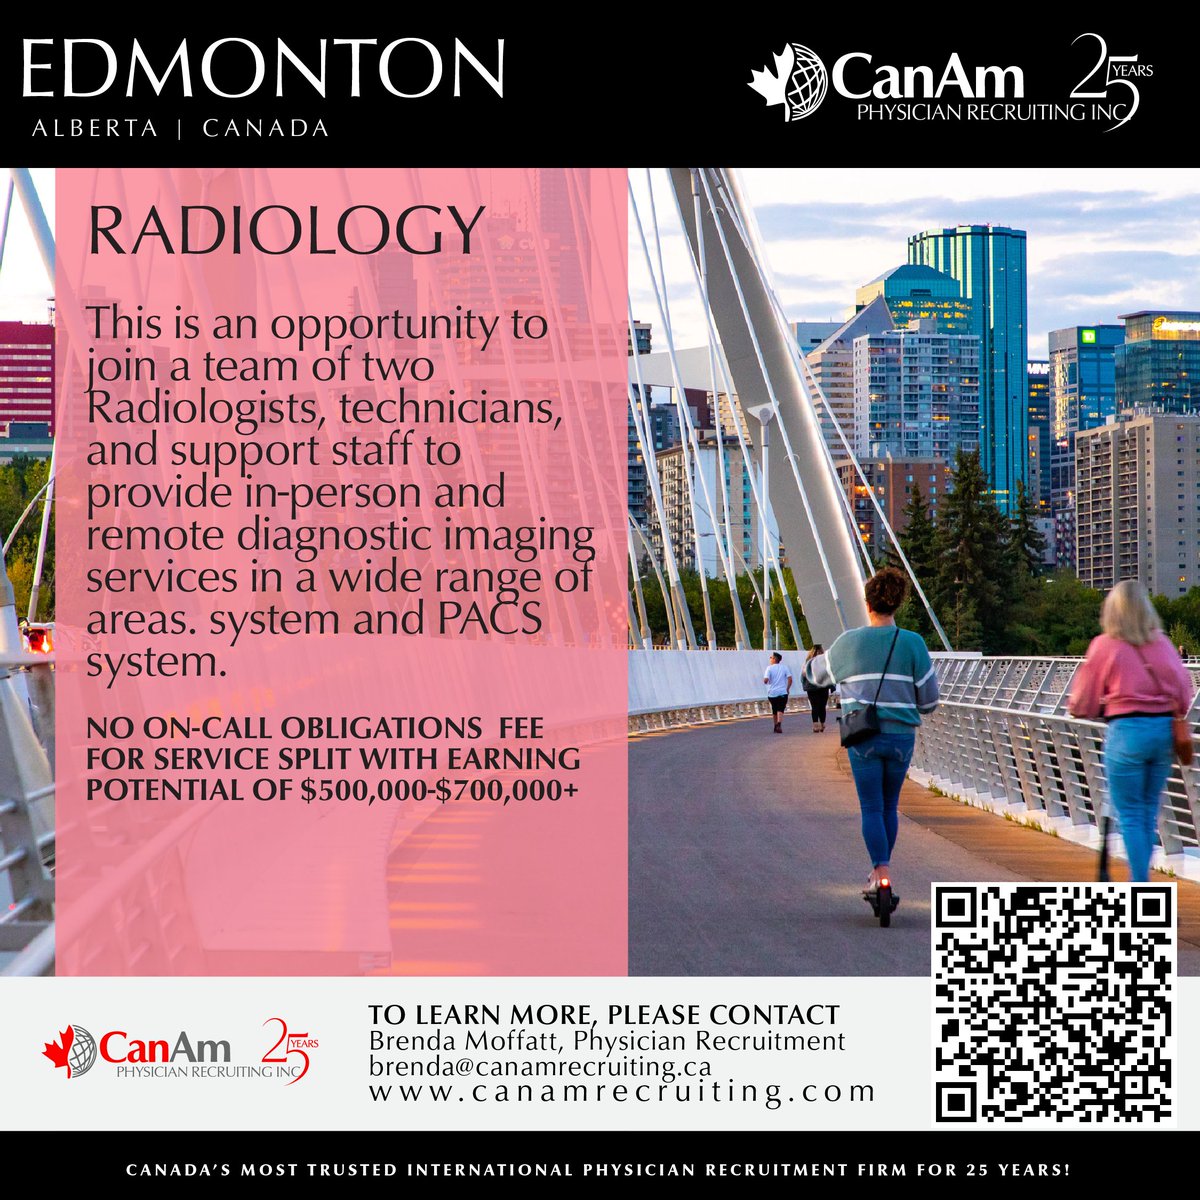 This is an opportunity to join a team of two Radiologists, technicians, and support staff to provide in-person and remote diagnostic imaging services S end CV to: brenda@canamrecruiting.ca
canamrecruiting.com
#radiologist #dotnetjobs #physicianjobs #edmontondocs